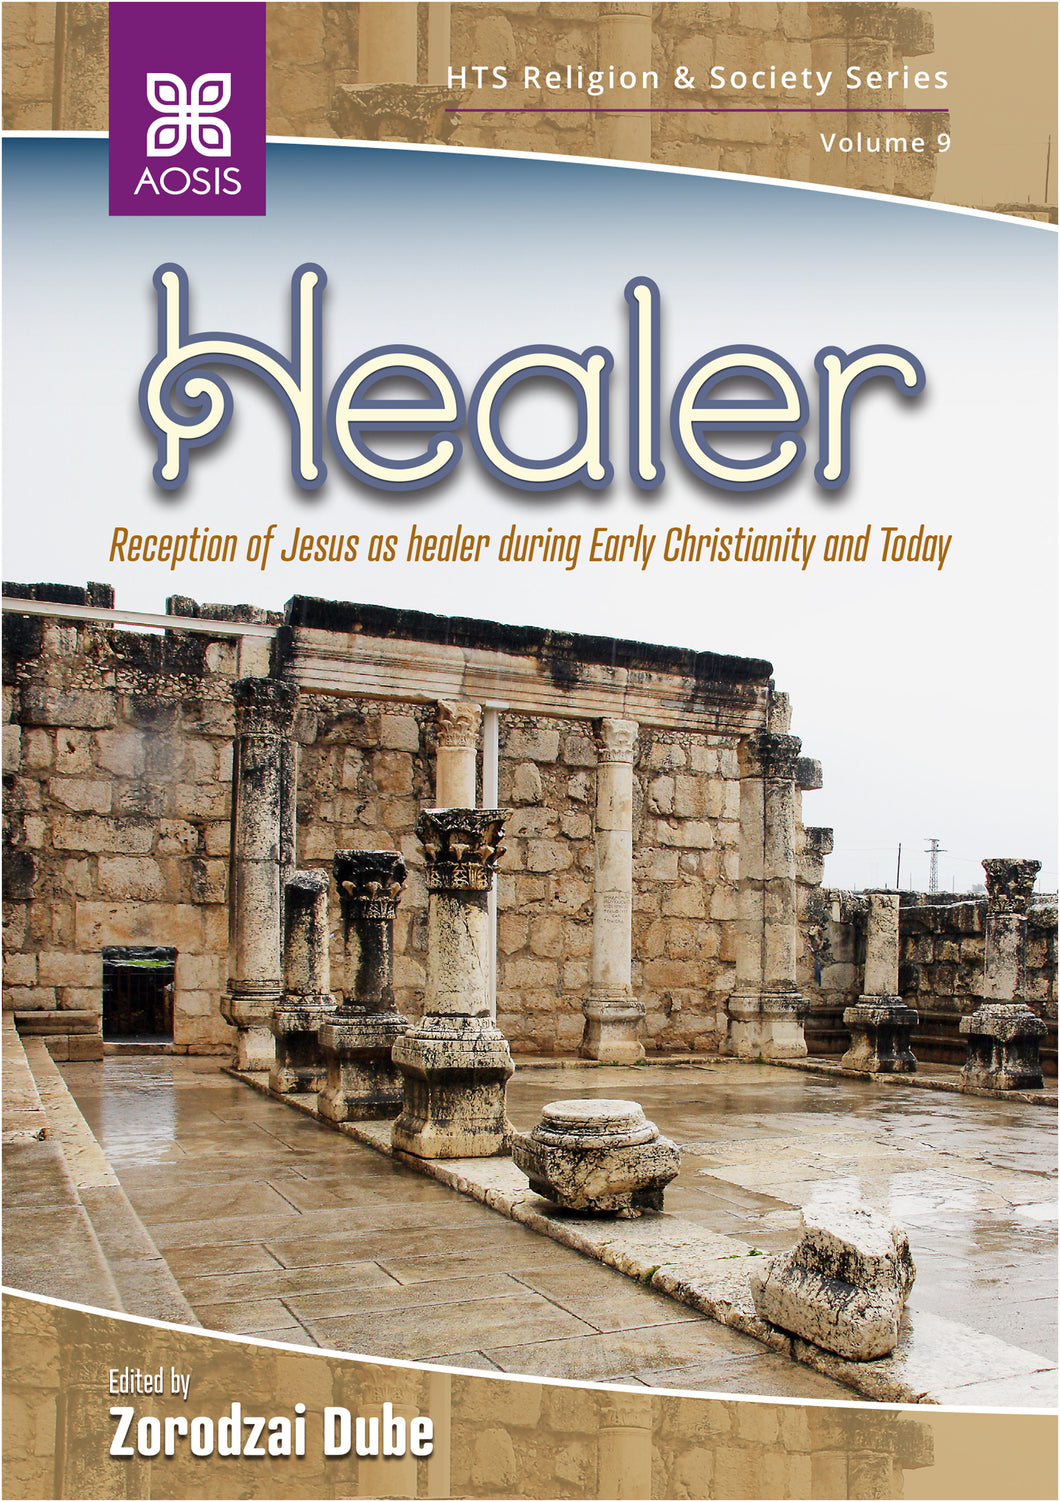 Healer: Reception of Jesus as healer during Early Christianity and Today (ePub Digital Downloads)